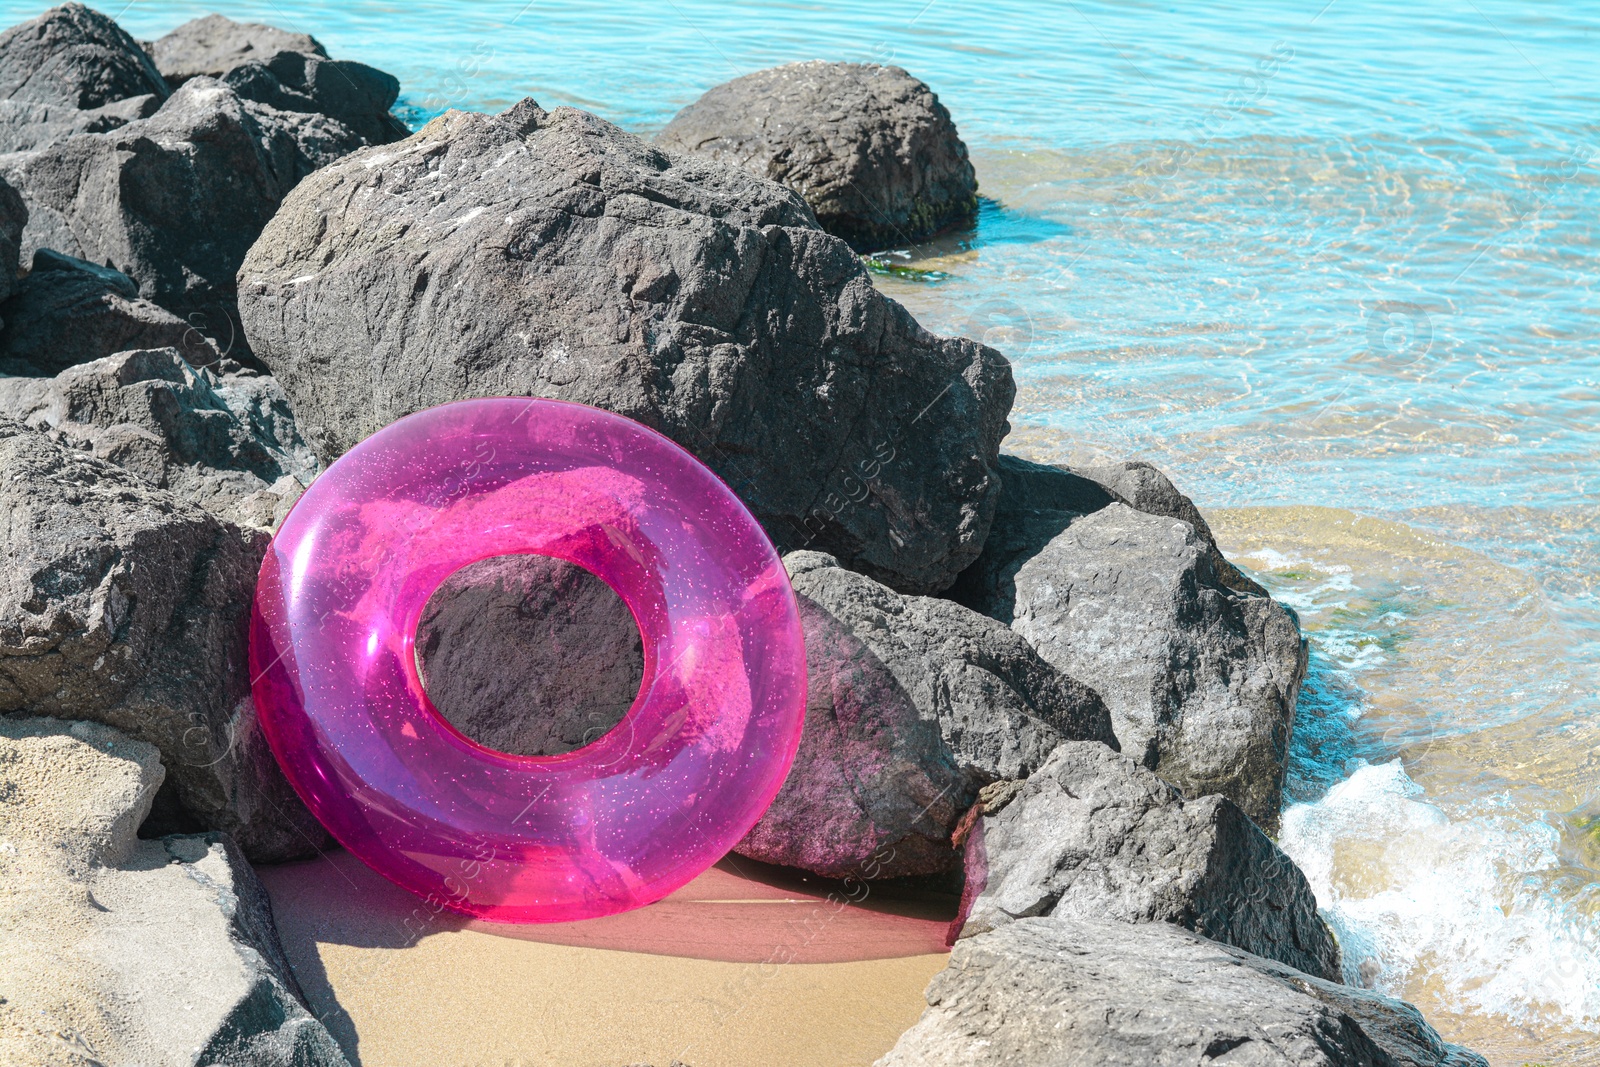 Photo of Bright inflatable ring on sandy beach near rocks